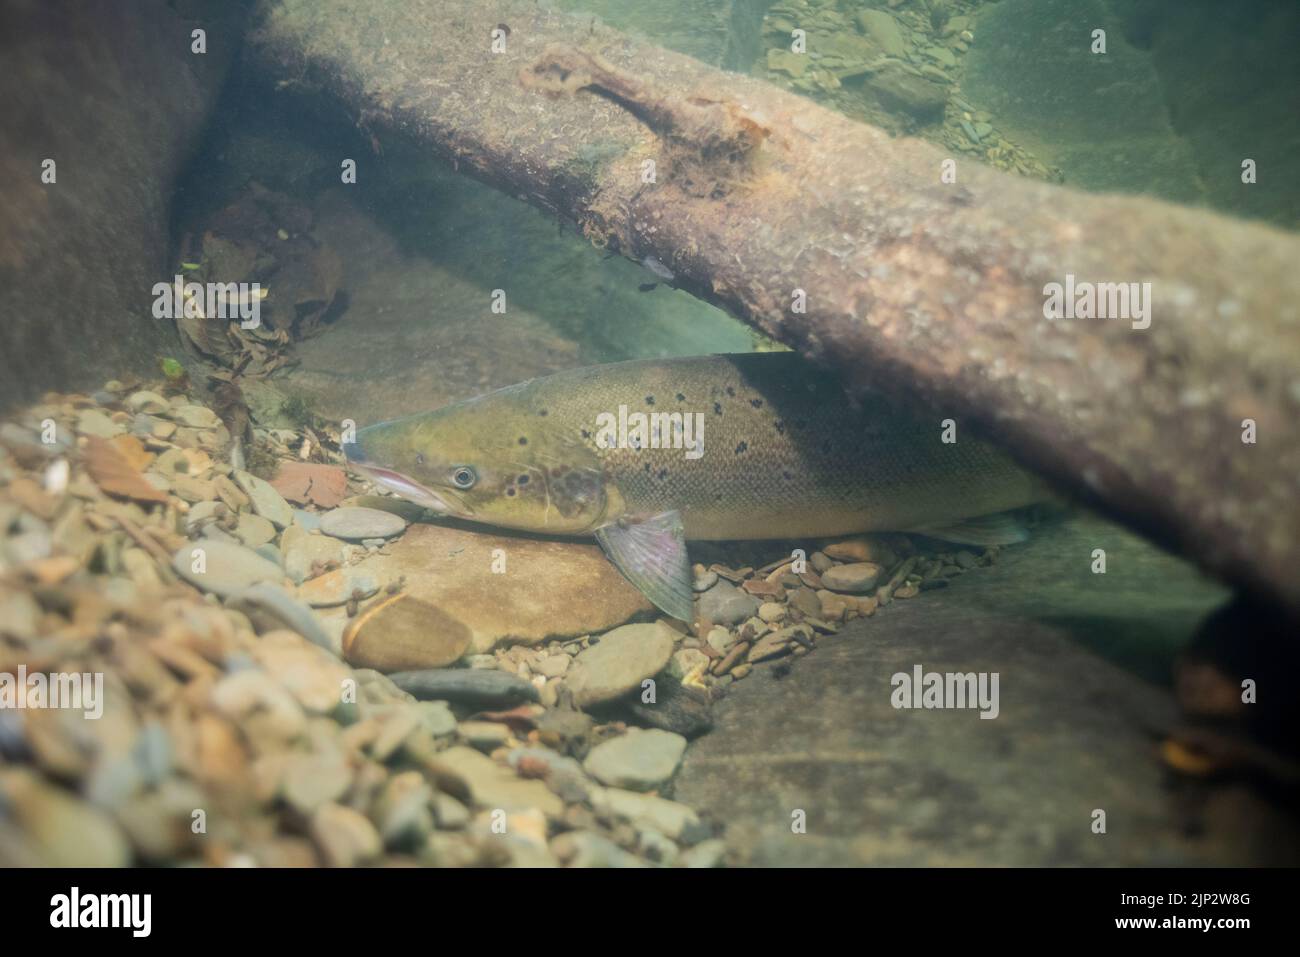 A salmon (Salmo salar) takes refuge under woody debris in a deep pool in the River Cothi during the heat wave on 13th August  2002. Wales, UK. Stock Photo